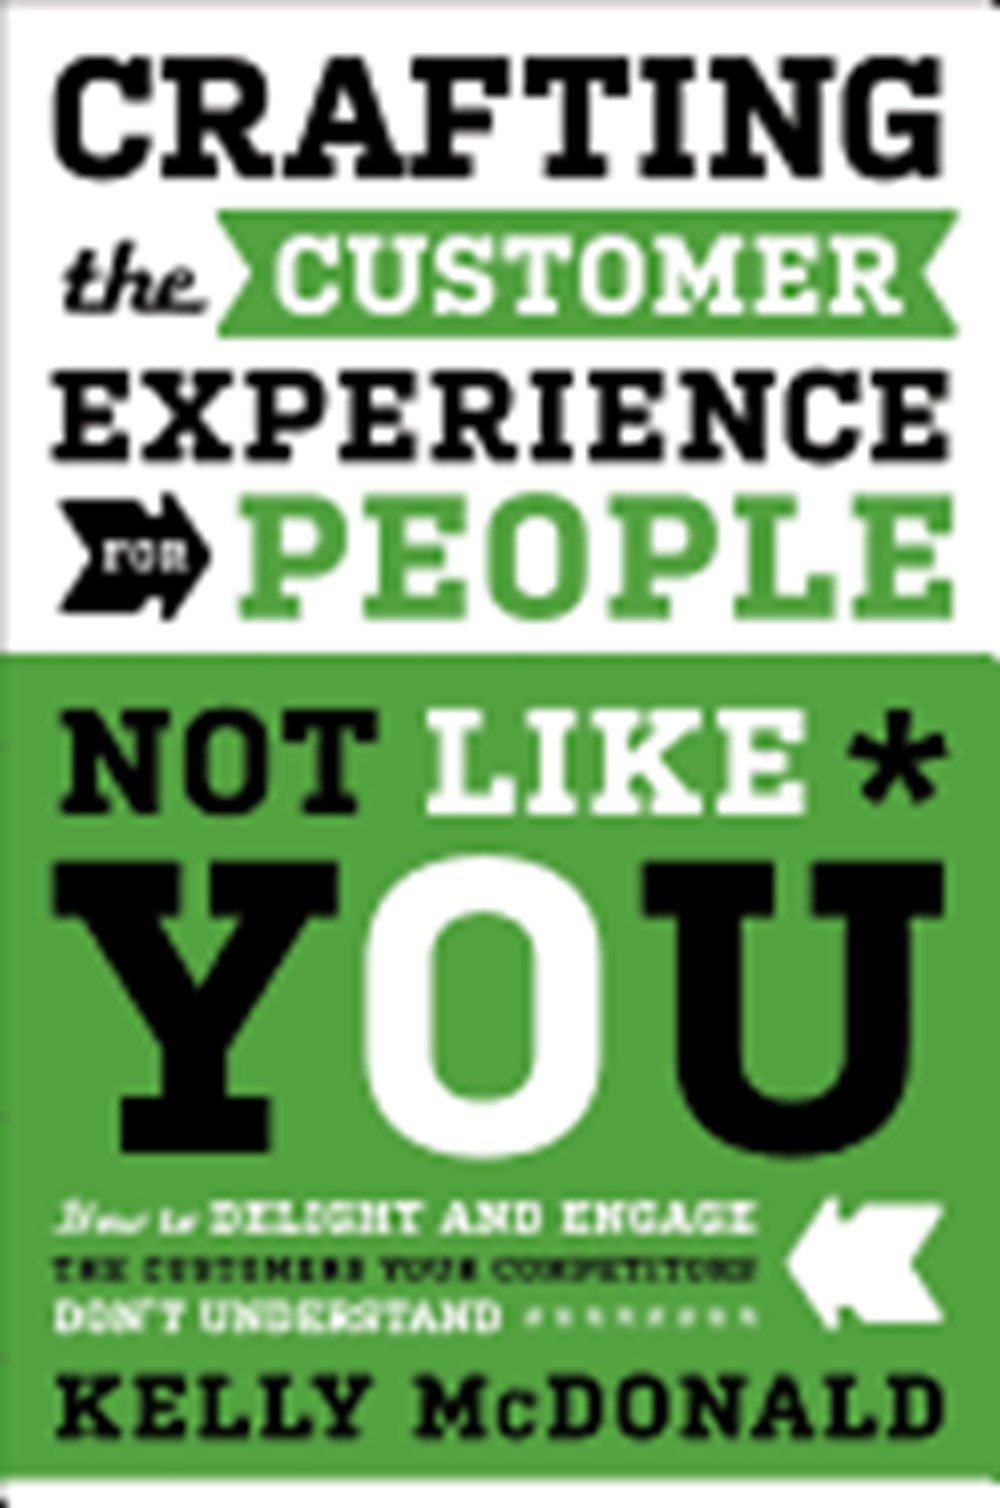 Crafting the Customer Experience for People Not Like You: How to Delight and Engage the Customers Yo